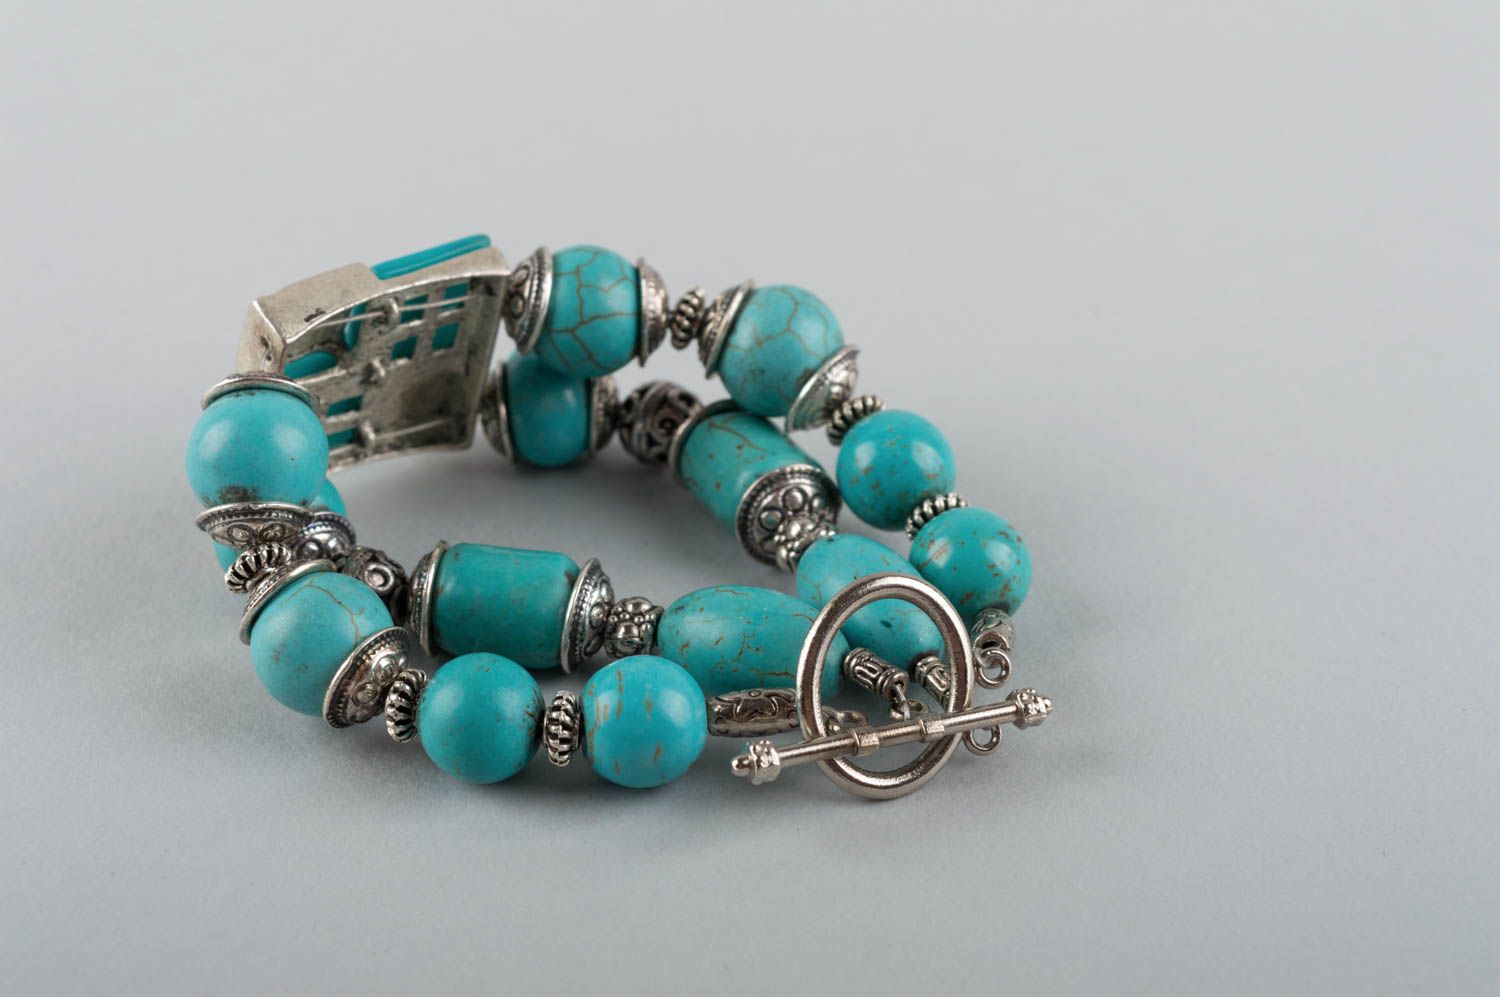 Handmade jewelry made of natural stones bracelet made of turquoise and brass photo 3